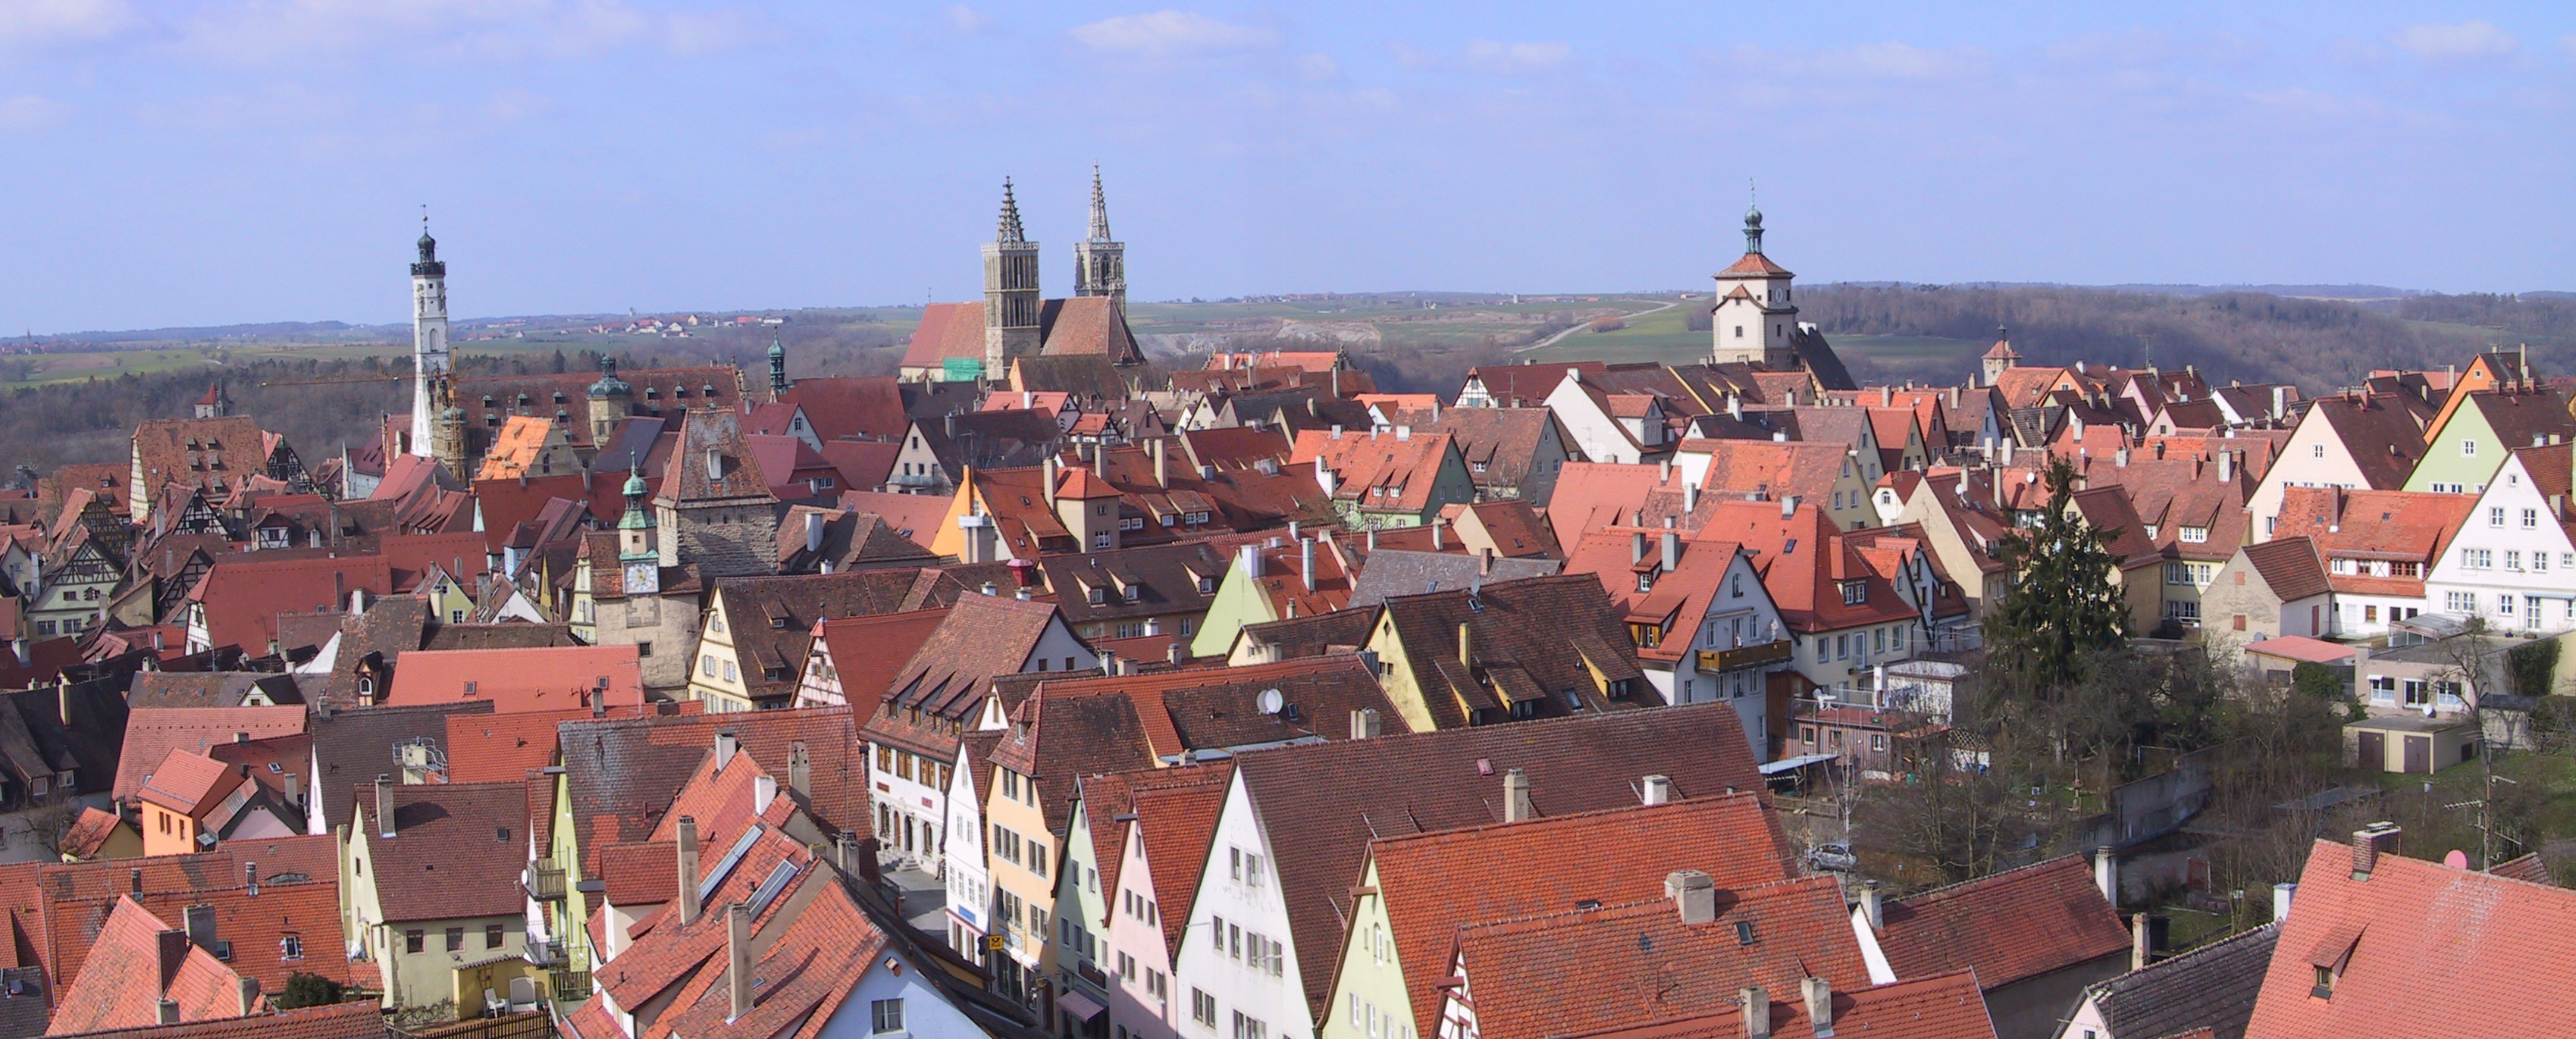 Cityscapes of Rothenburg